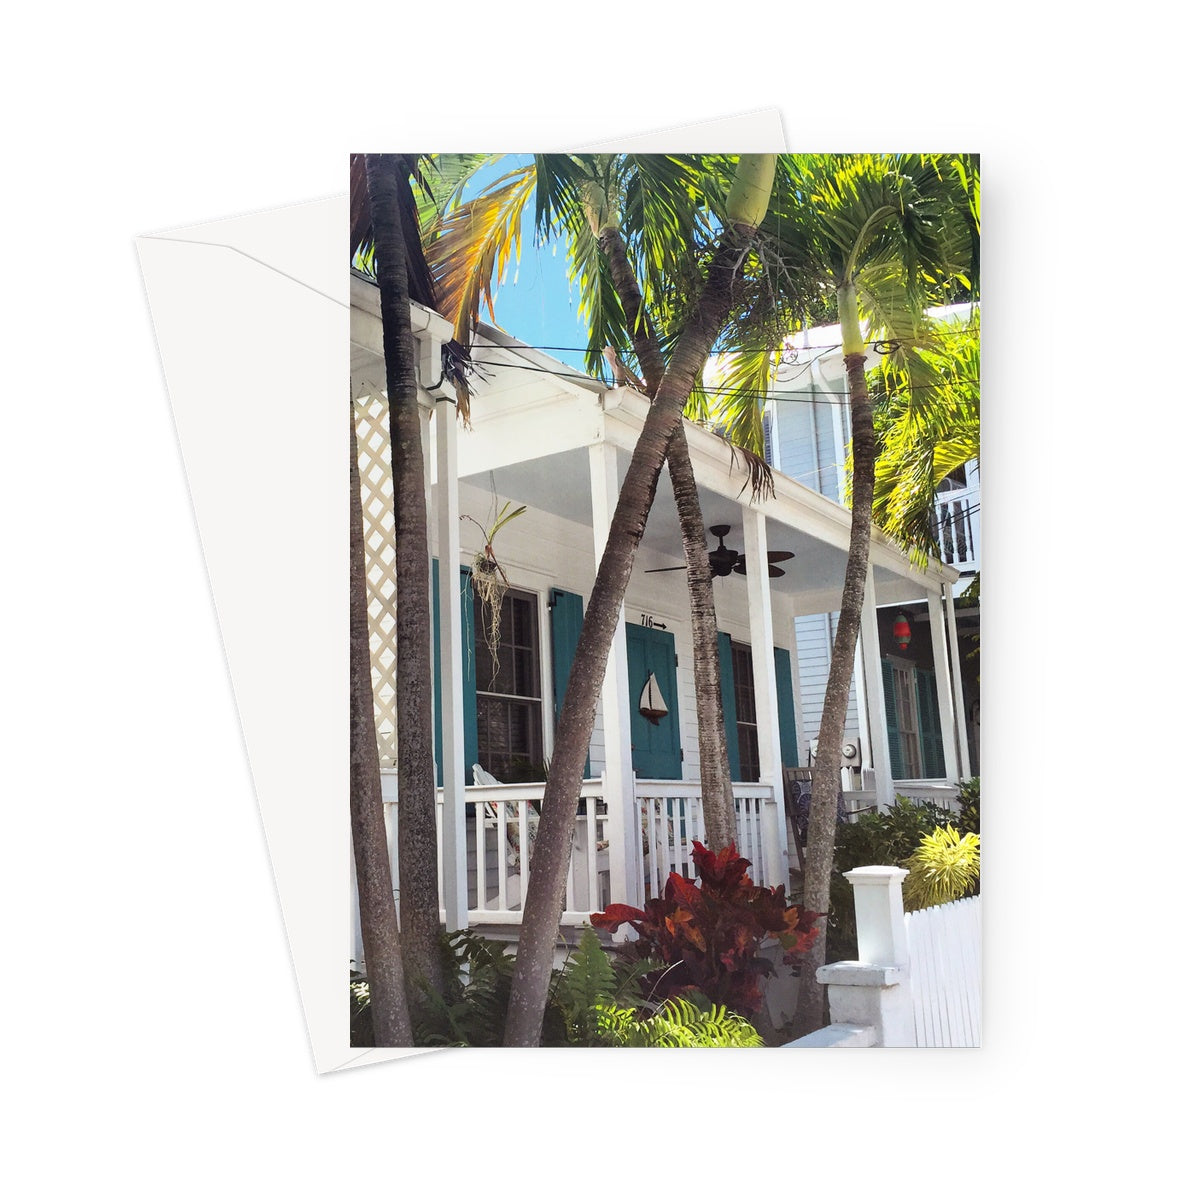 This greeting card shows the white veranda of a conch house with green/blue shutters and front door. There are palms immediately outside in the front garden. A small white yacht is attached to the front door.